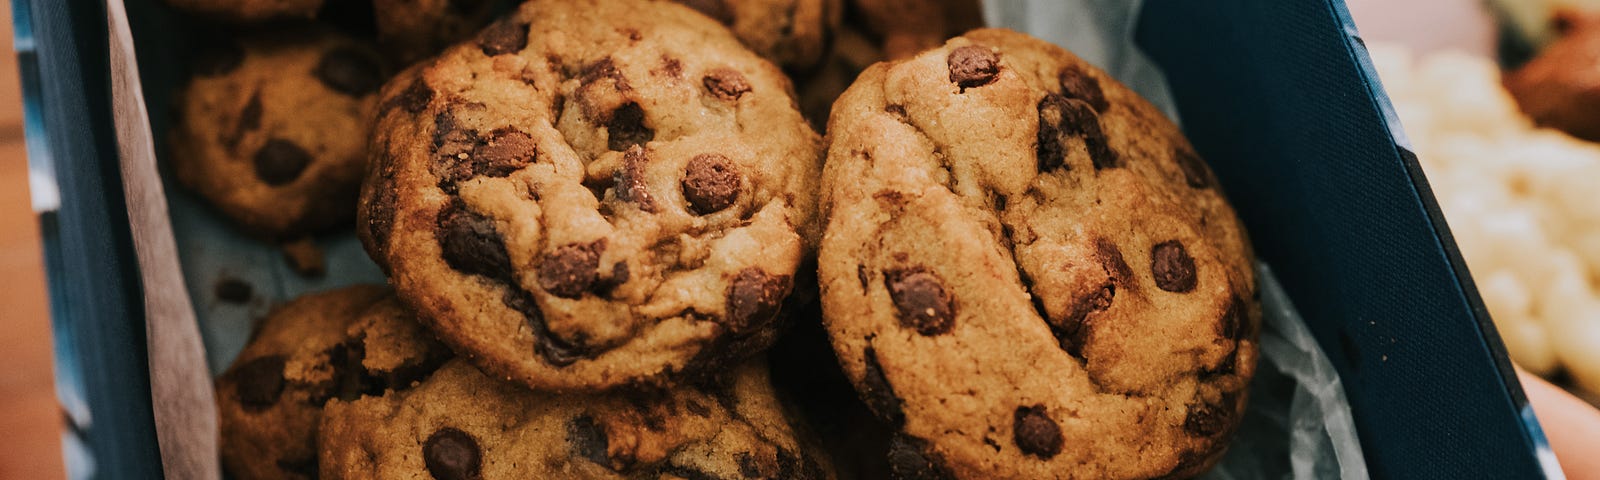 Image of chocolate chip cookies on a tray.